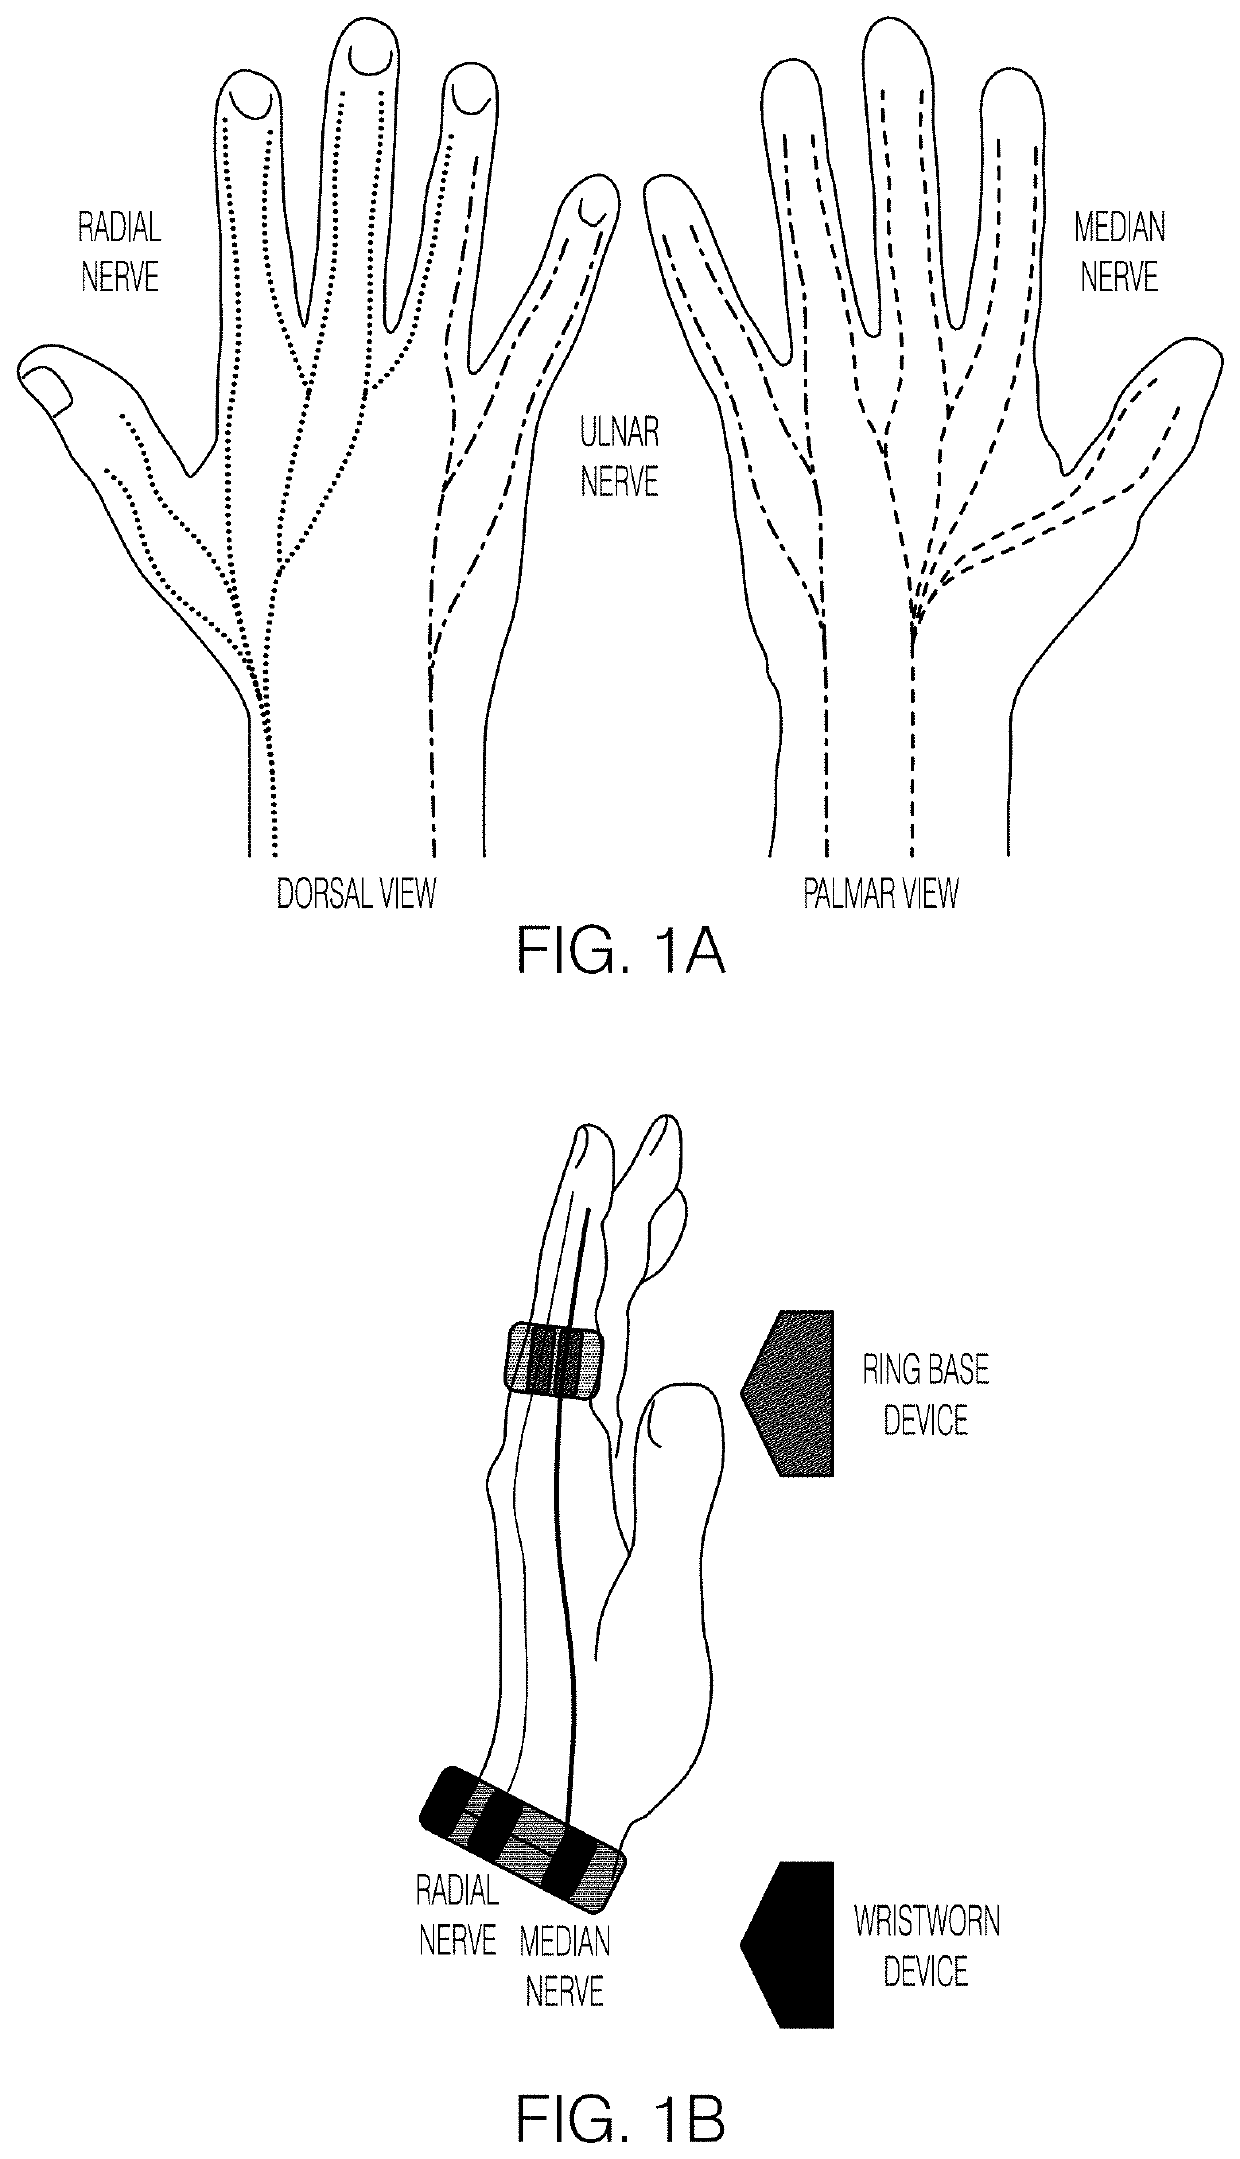 Systems and methods for peripheral nerve stimulation in the finger or hand to treat hand tremors